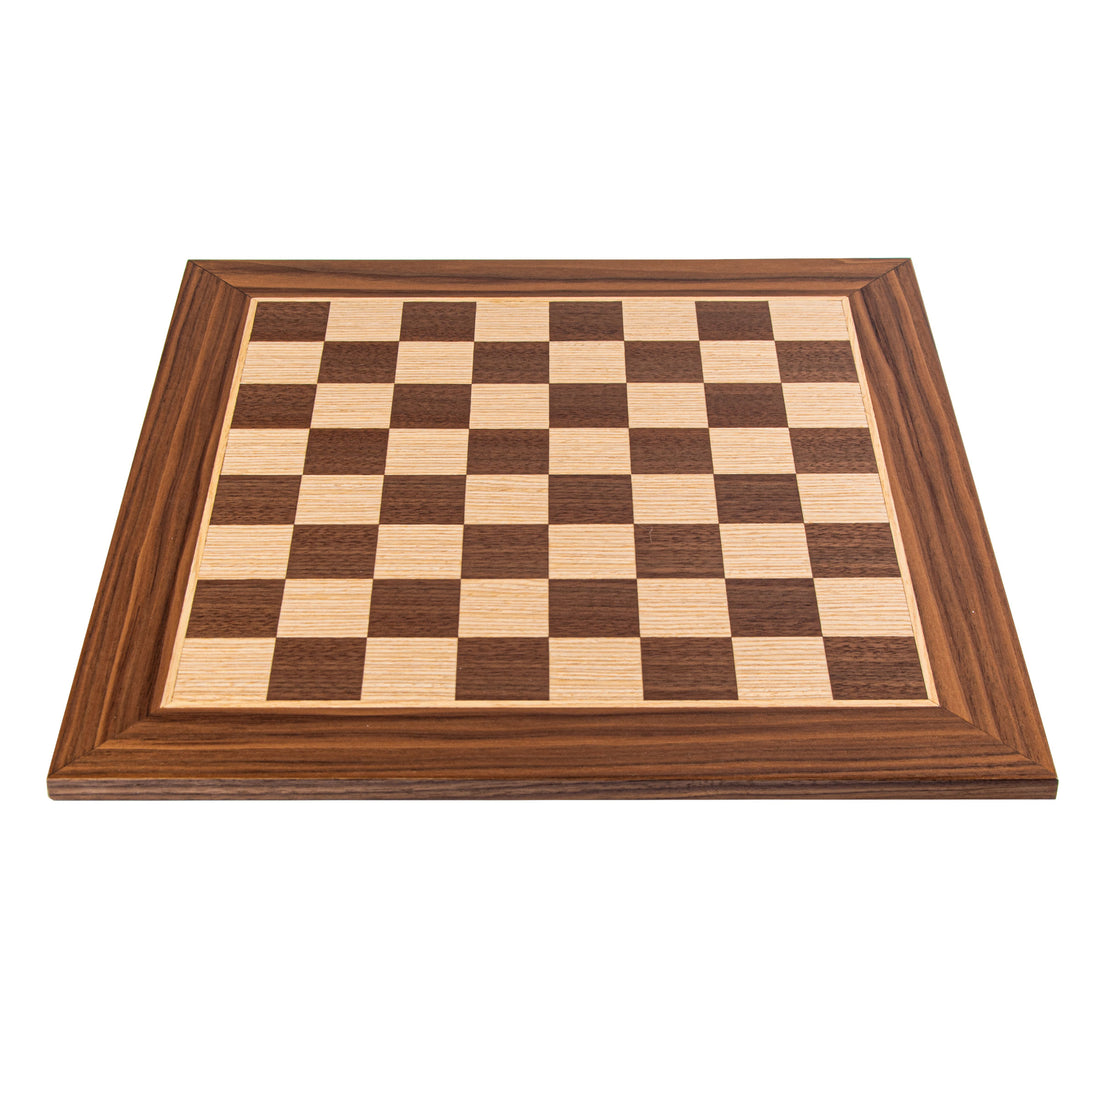 Handcrafted Walnut Wood & Oak Inlaid Chessboard - 50x50cm (Large) - Premium Chess from MANOPOULOS Chess & Backgammon - Just €69.50! Shop now at MANOPOULOS Chess & Backgammon